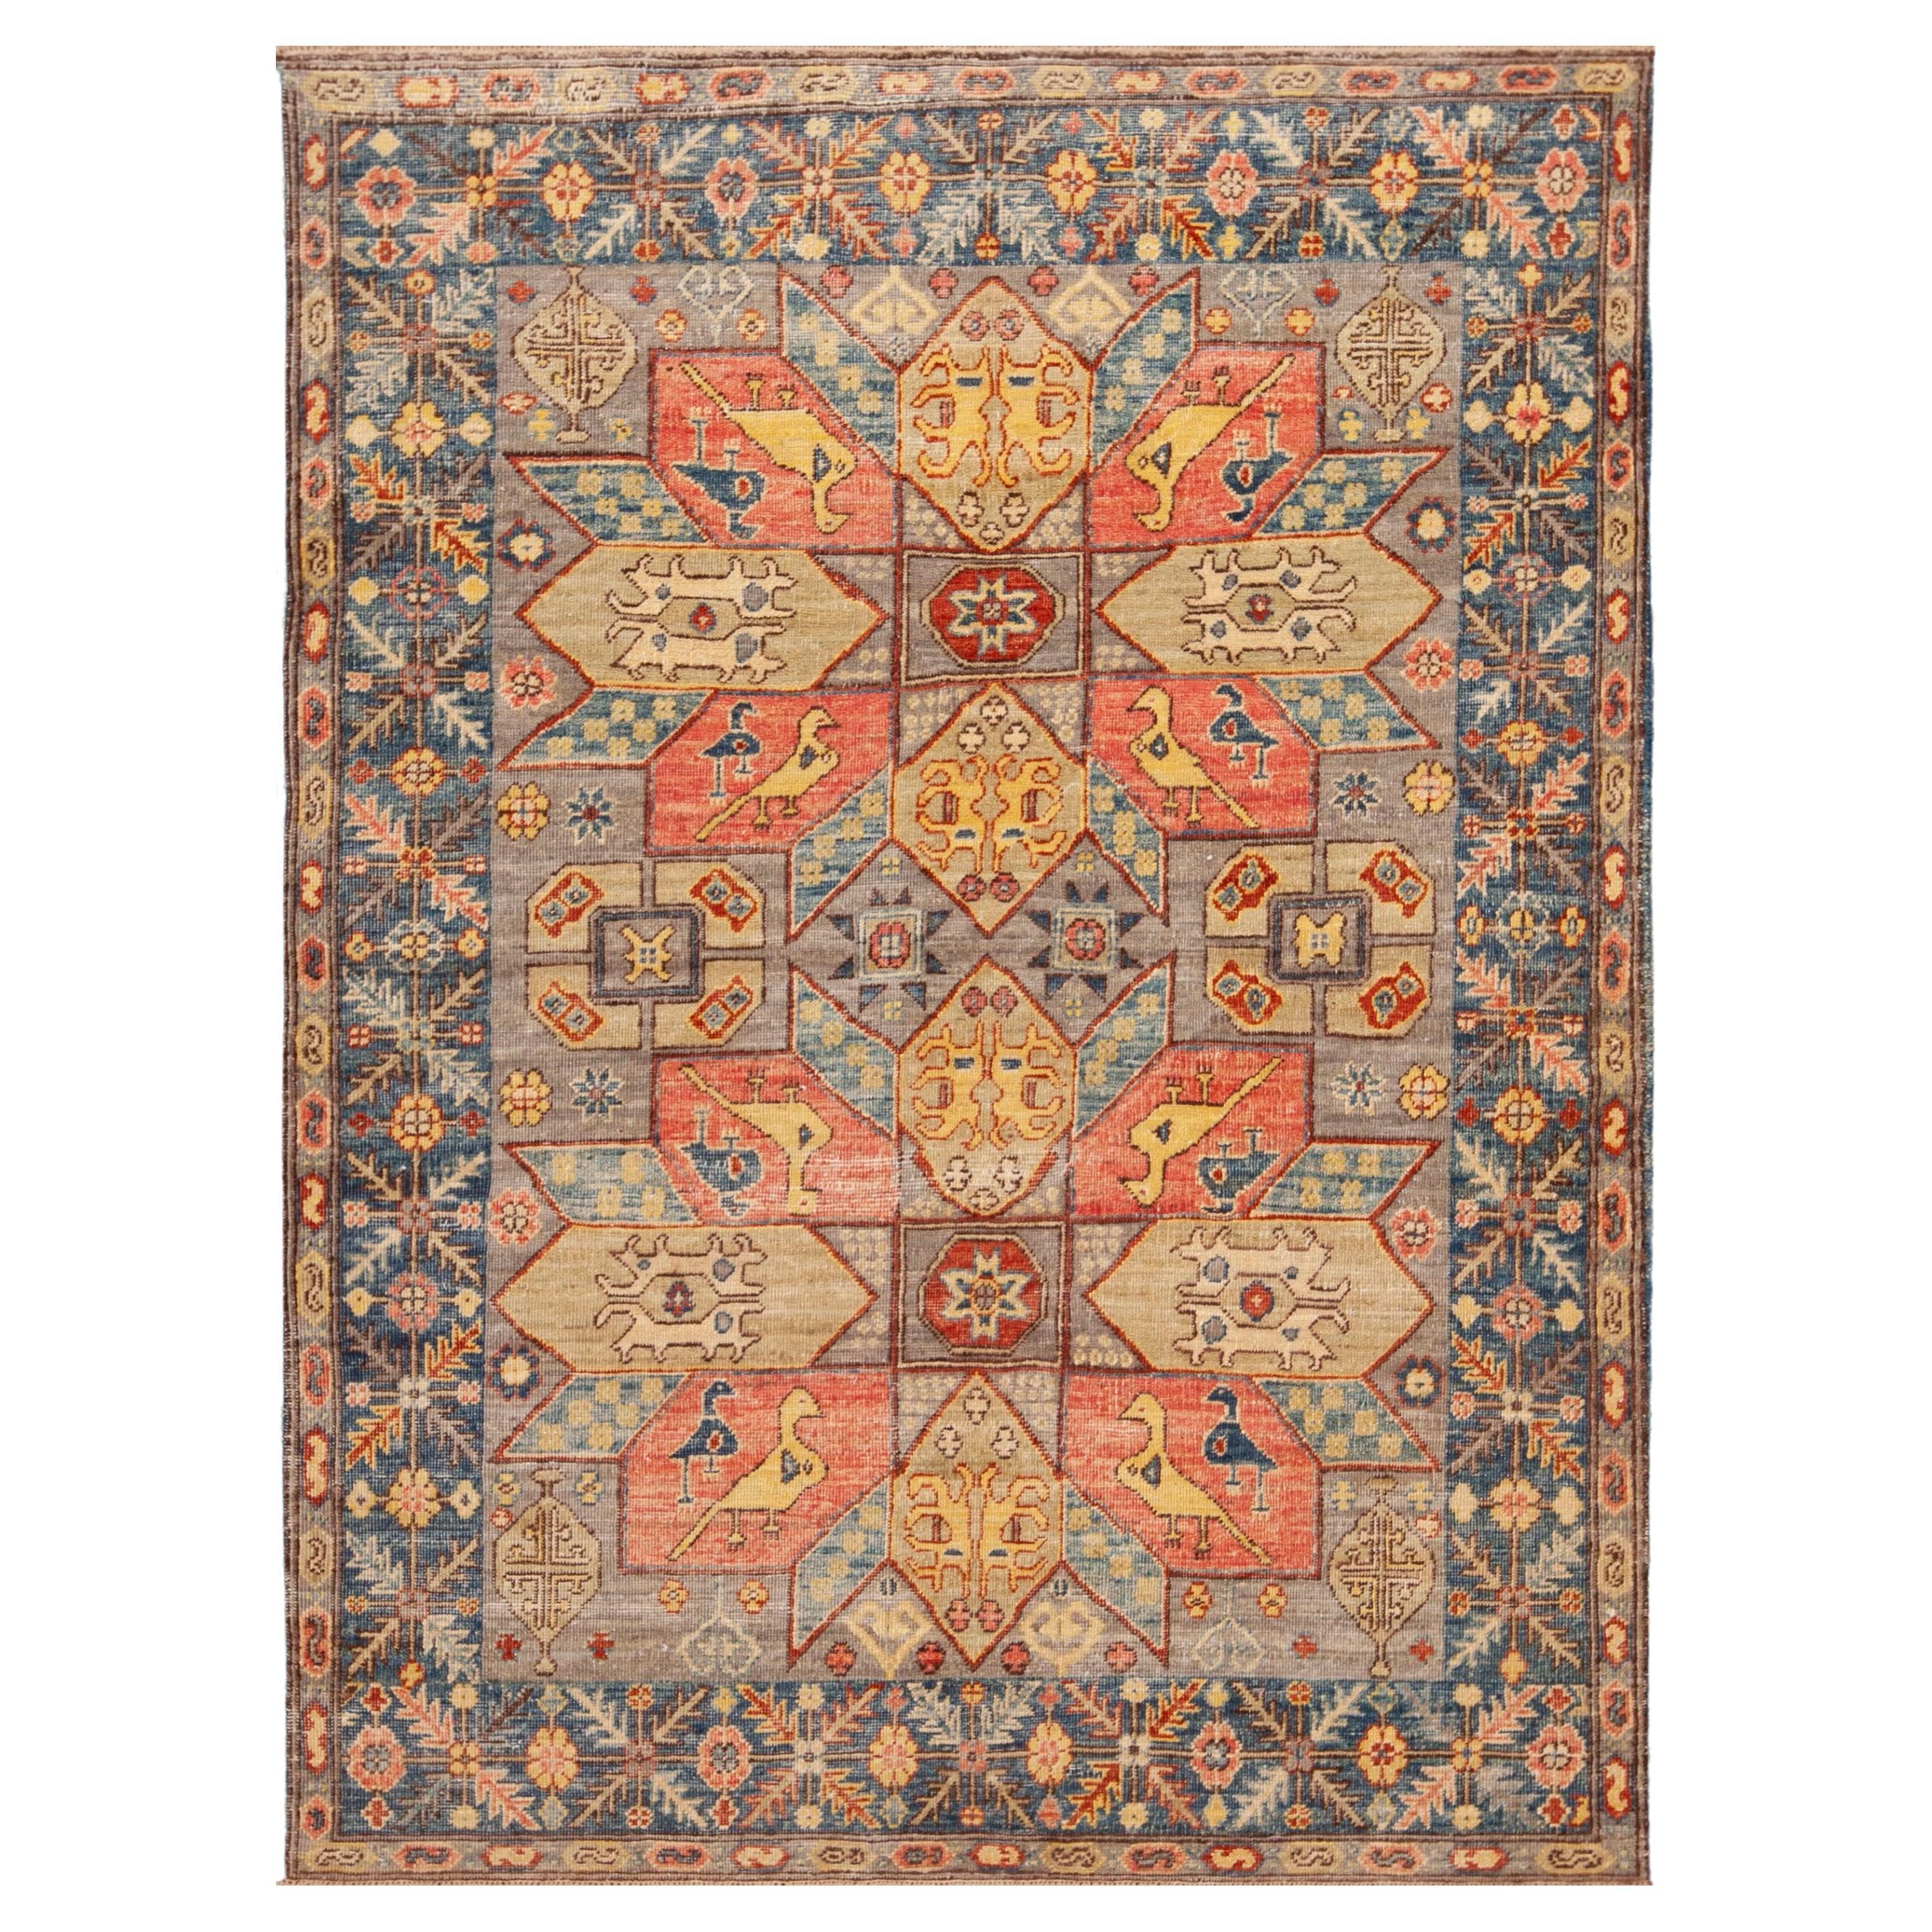 Nazmiyal Collection Rustic Color Tribal Geometric Modern Area Rug 4'4" x 5'10" For Sale